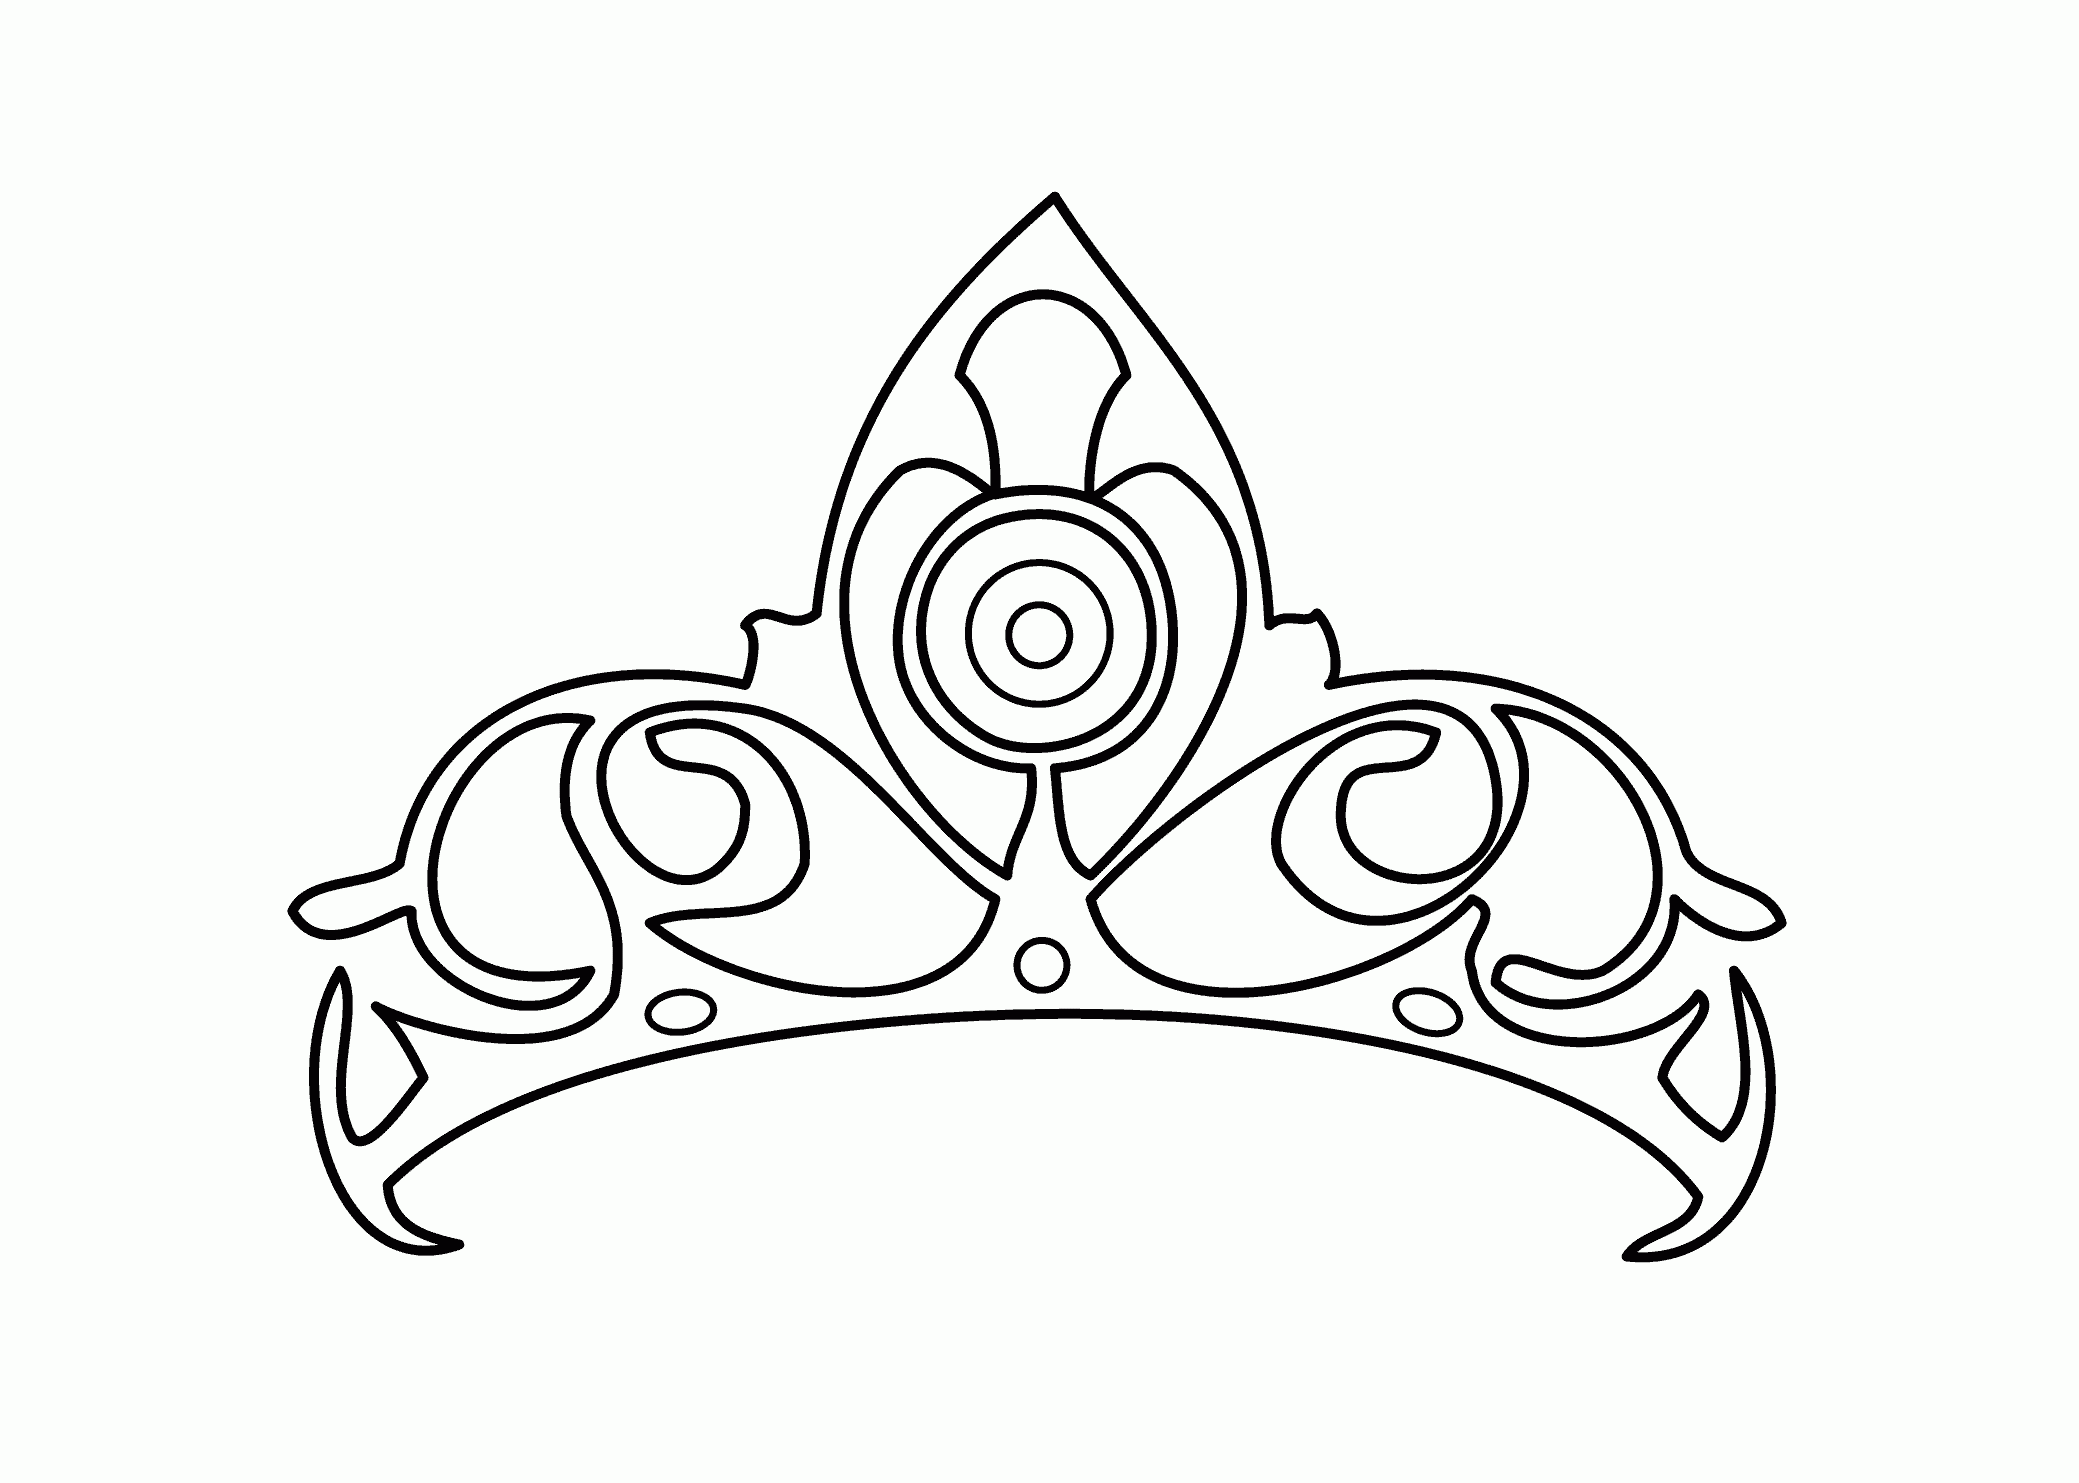 New Free Coloring Pages Of Princess Crowns - Widetheme